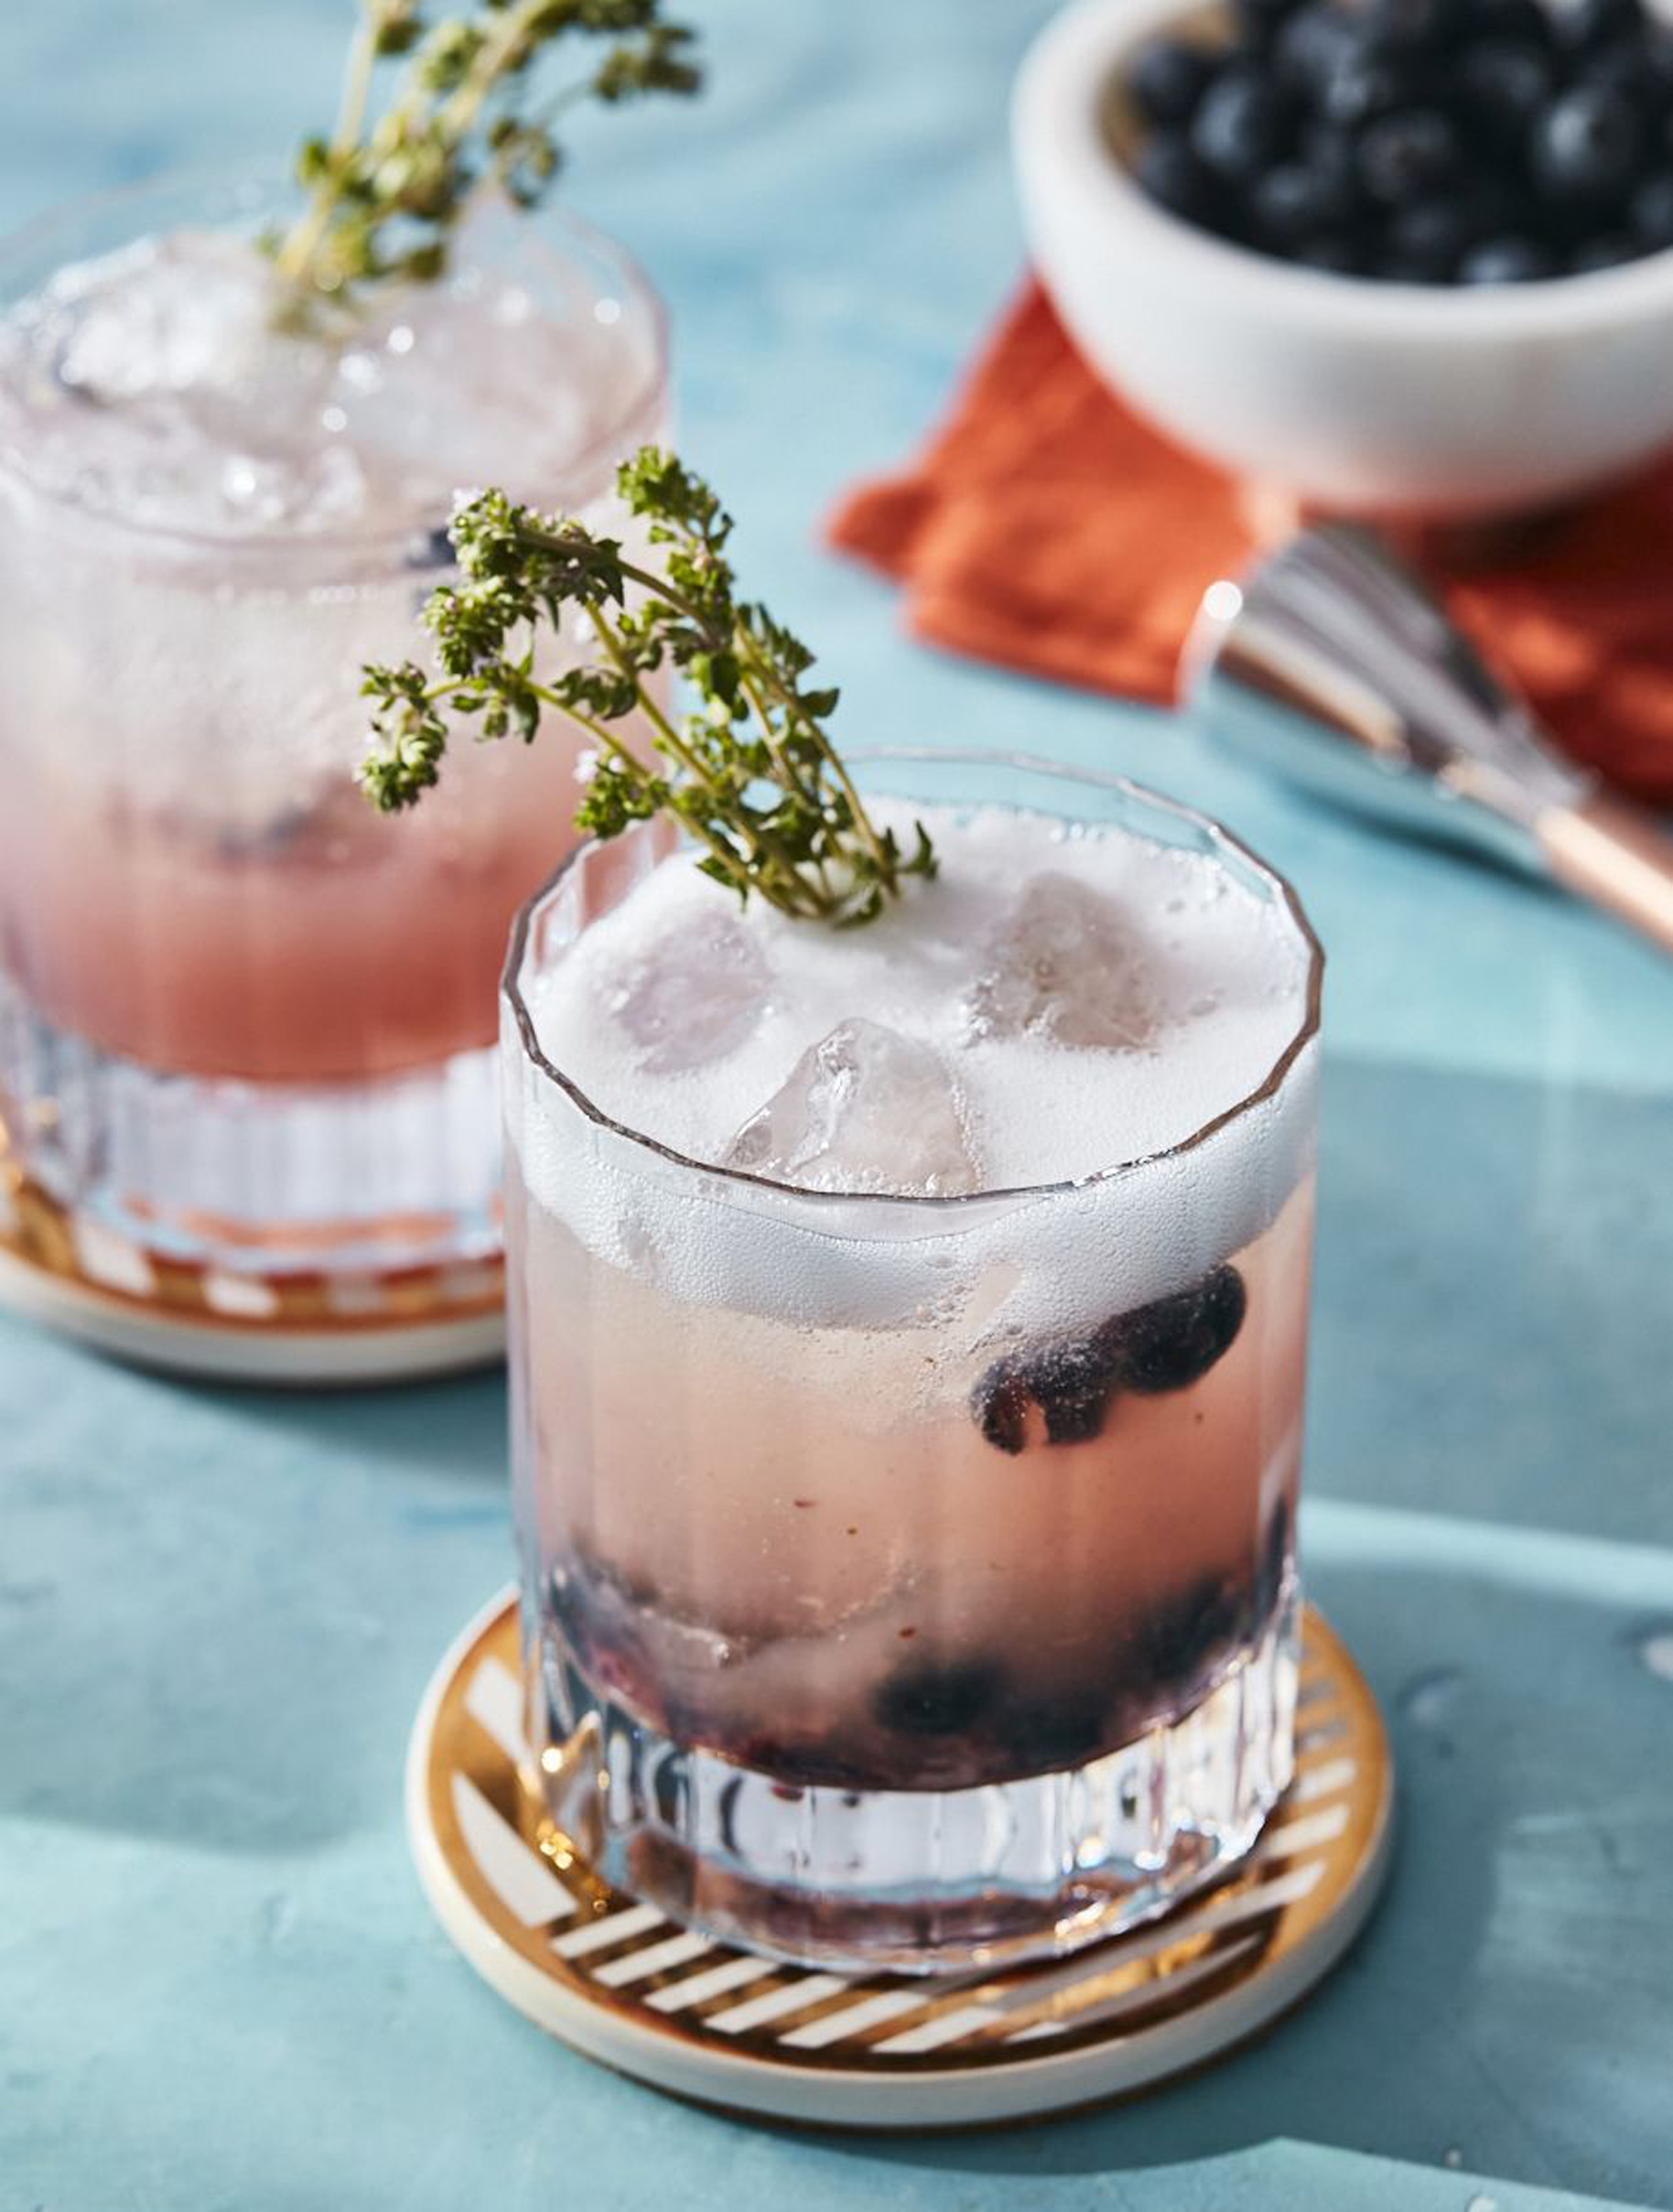 Blueberry Lemonade Spritz cocktail from Just a Spritz by Danielle Centoni 